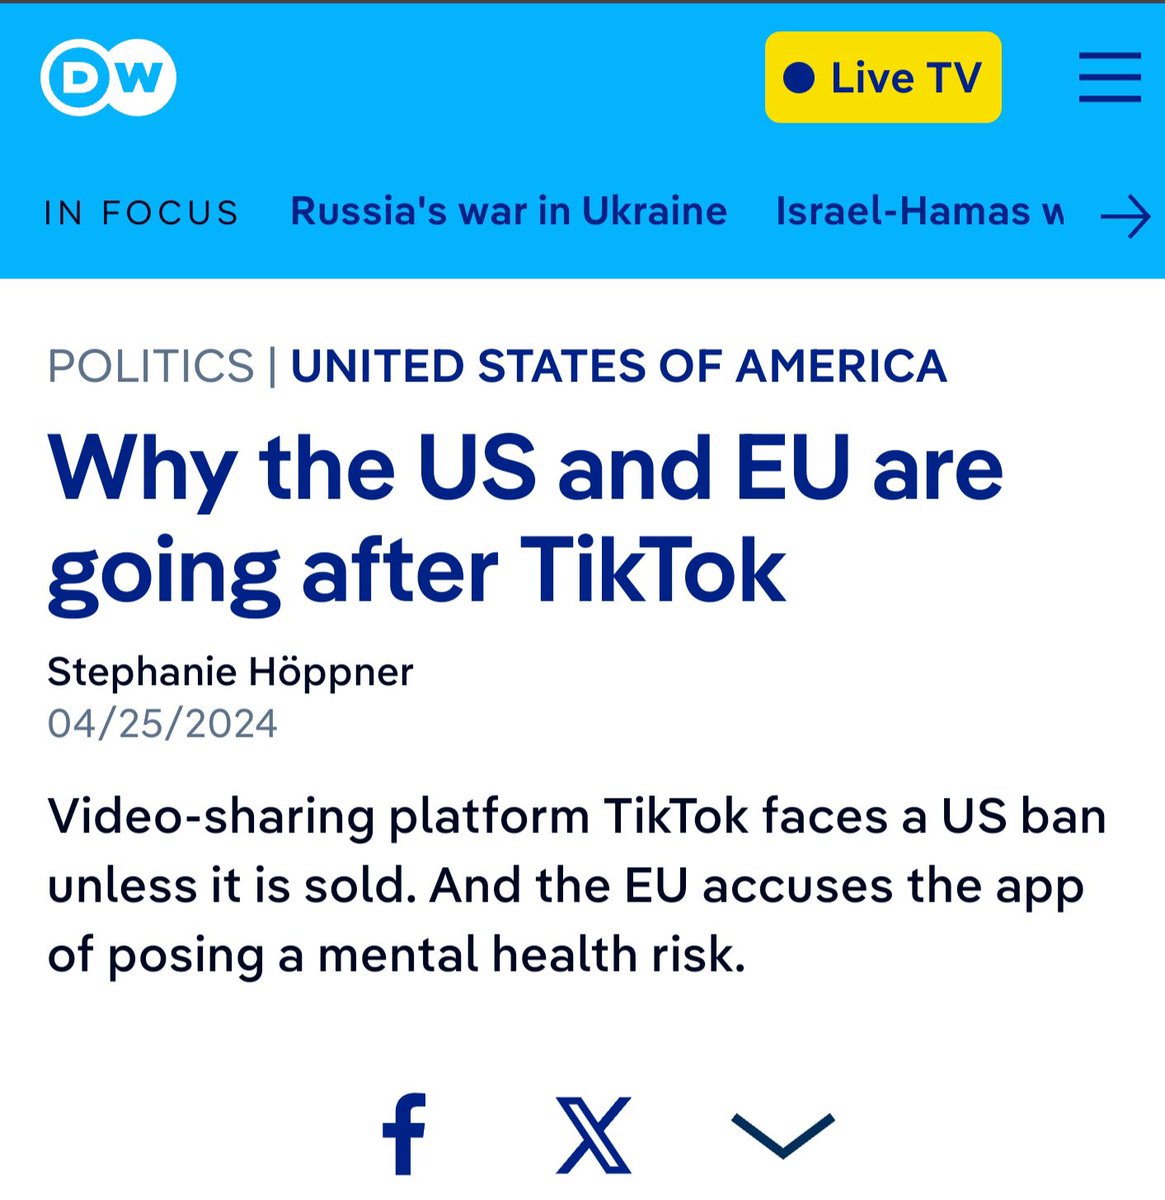 Joe Biden signed the Ukraine aid package into law, which included a ban on TikTok unless its Chinese parent sells.

The U.S. is not acting alone. The European Union has also taken action against TikTok. 

One concern is China will use TikTok to interfere in elections.
#DemVoice1